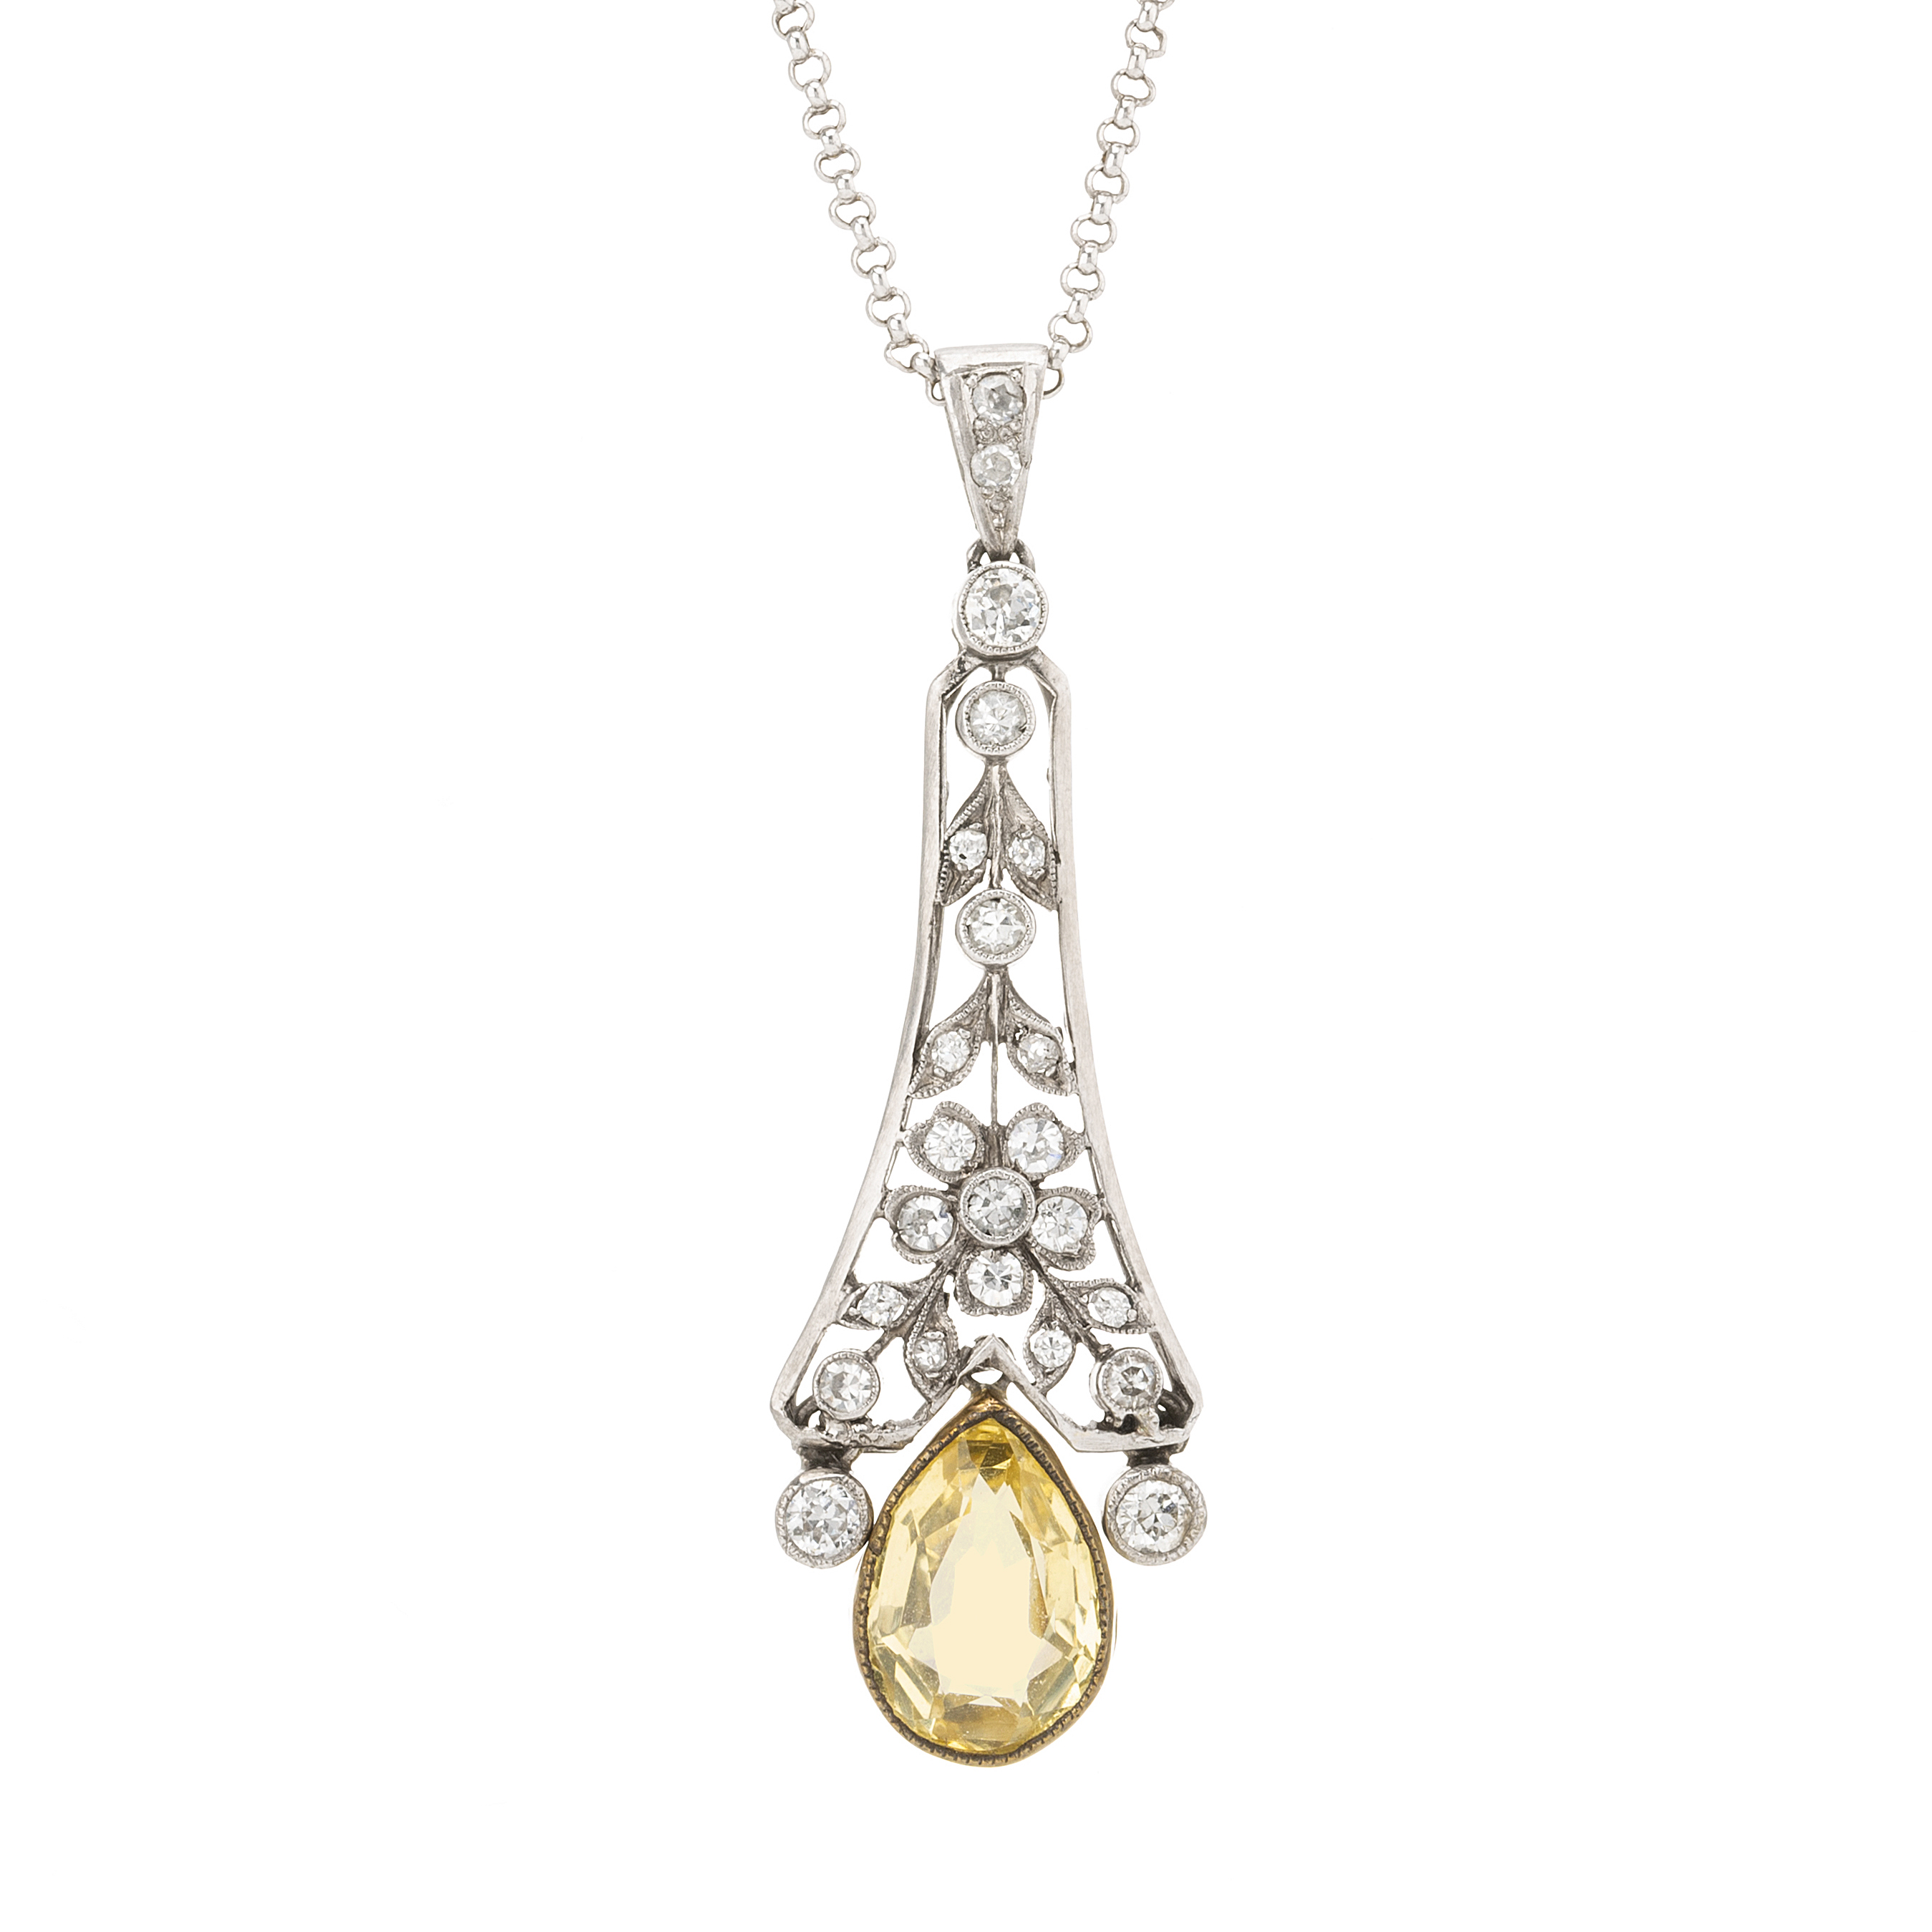 An early 20th century Sri Lankan yellow sapphire and diamond necklace